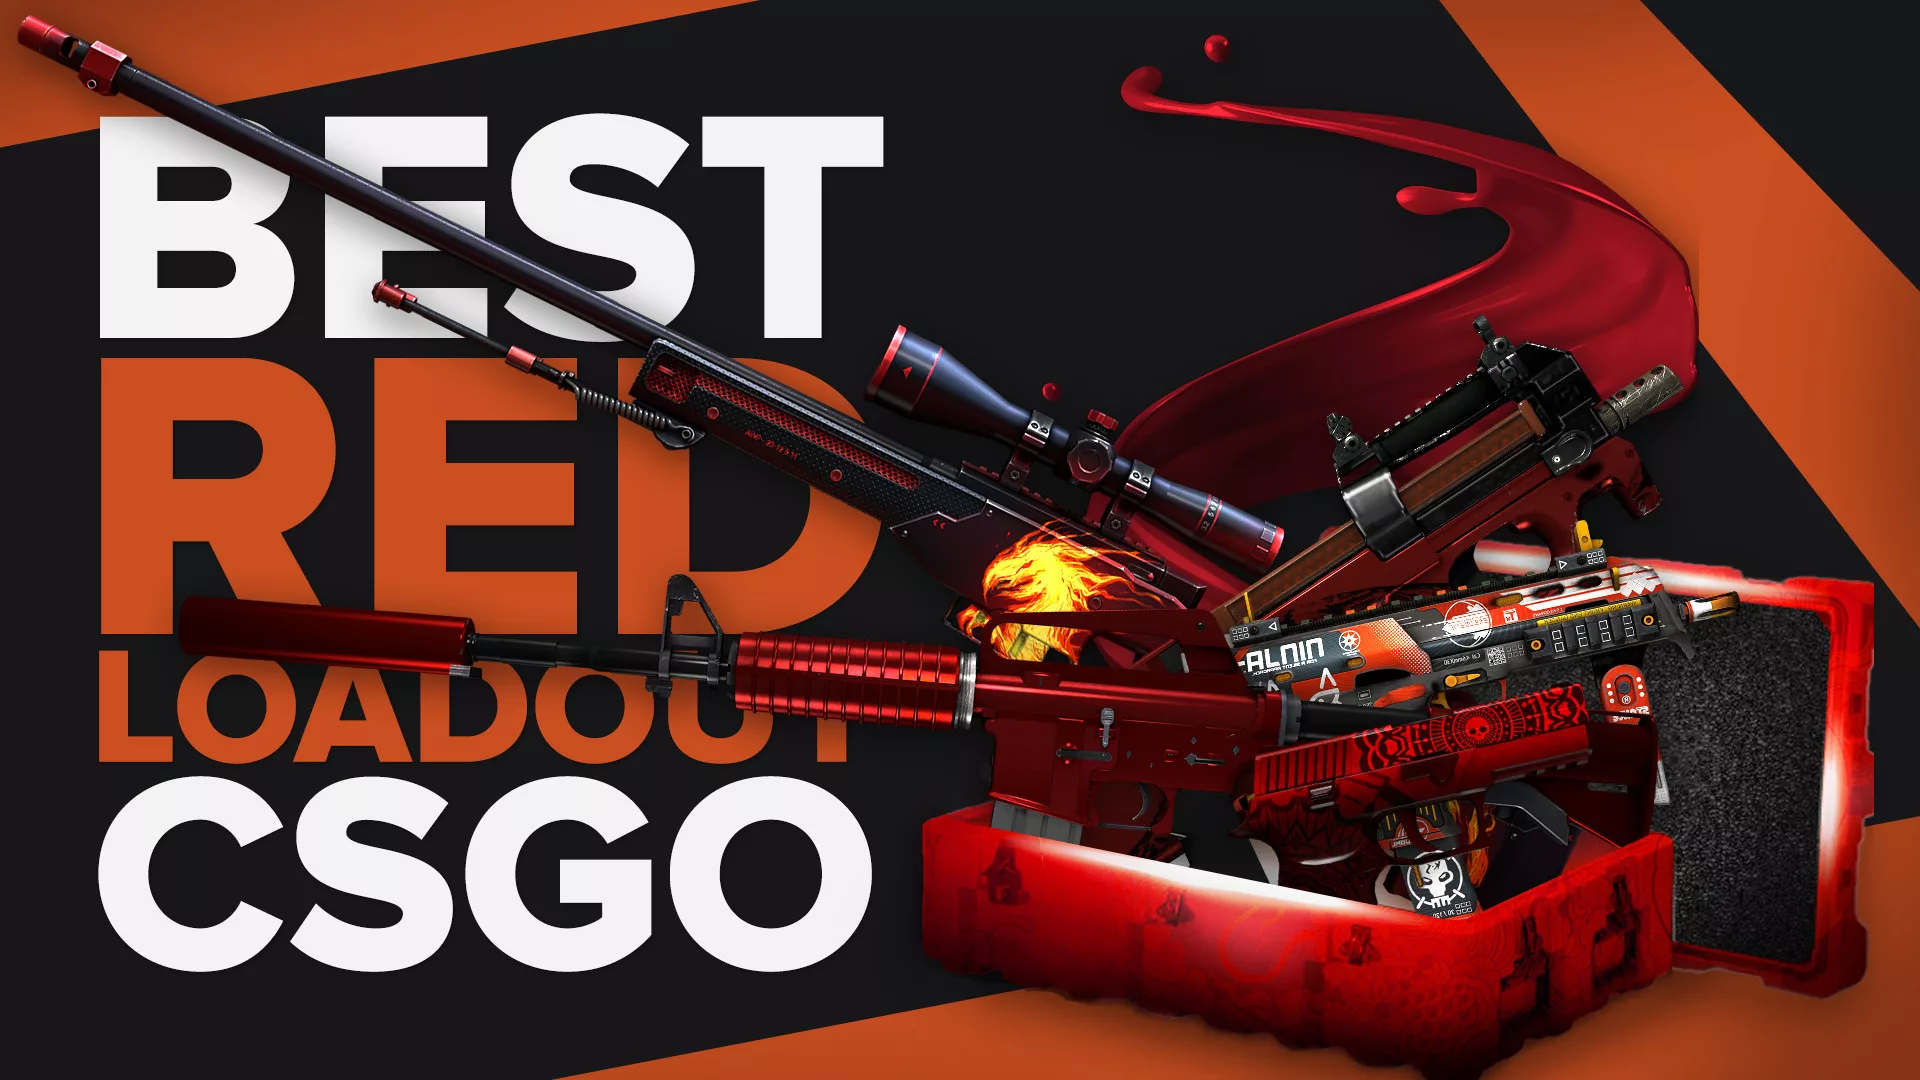 The Best Red Loadout For CSGO